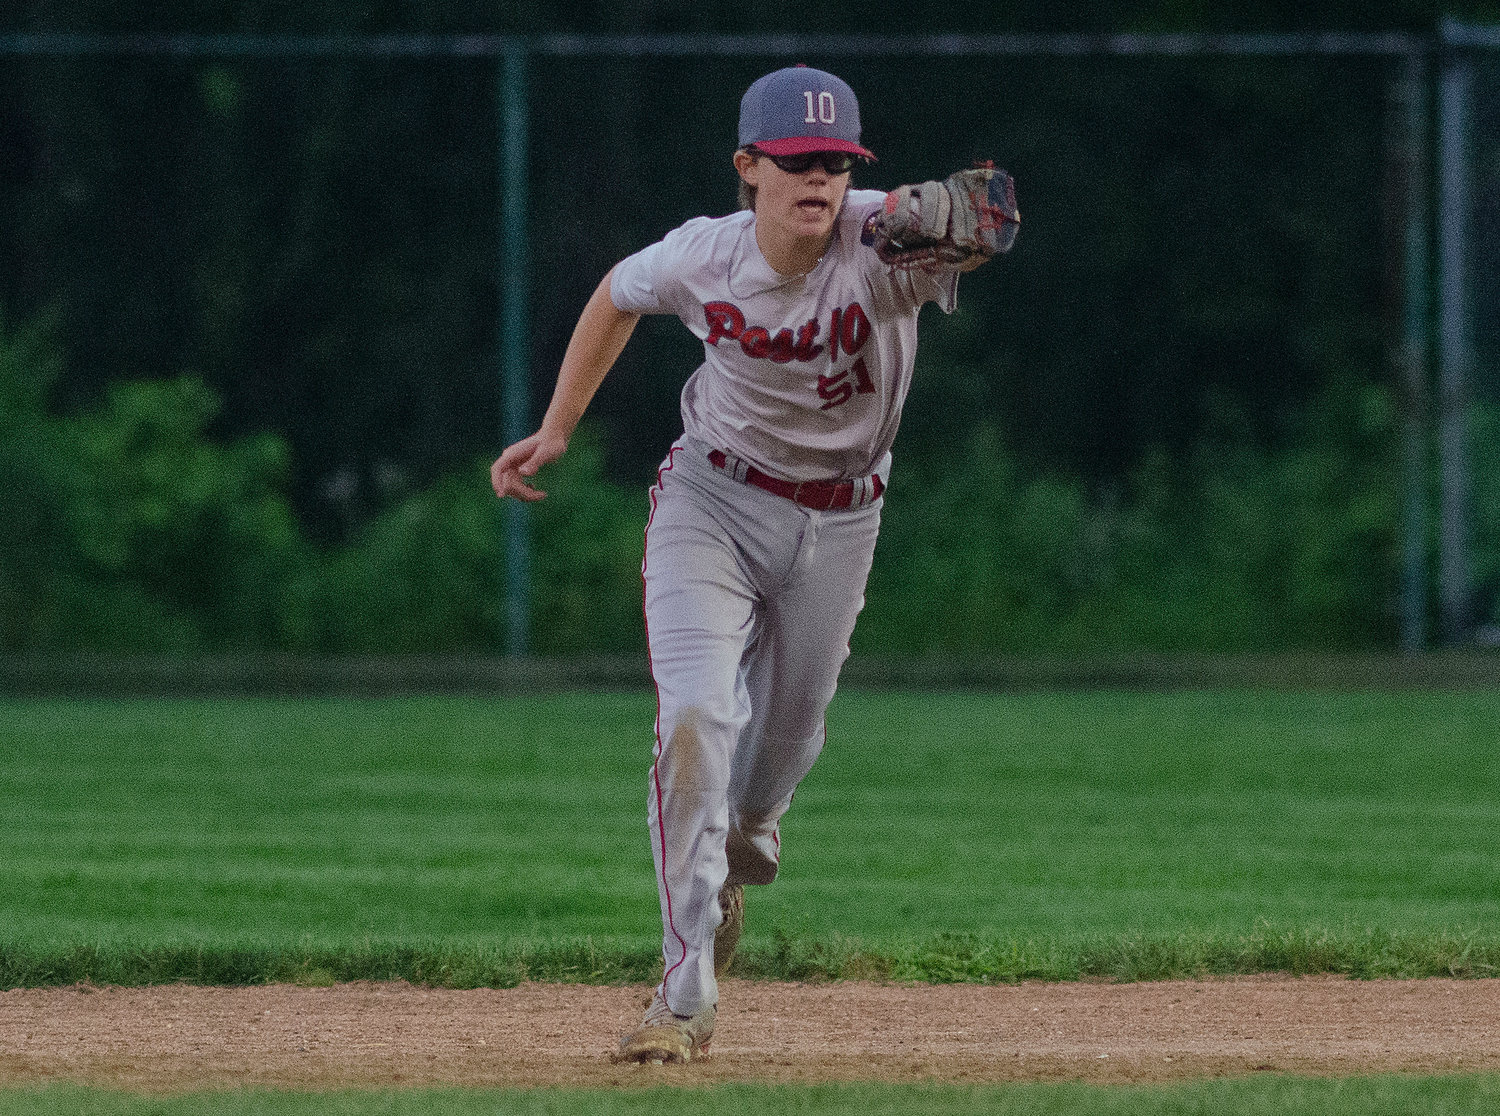 Brian Rutkowski, making a play in the team's final regular season game last week, was the offensive standout for the Post 10 Juniors in their playoff opening win August 2.